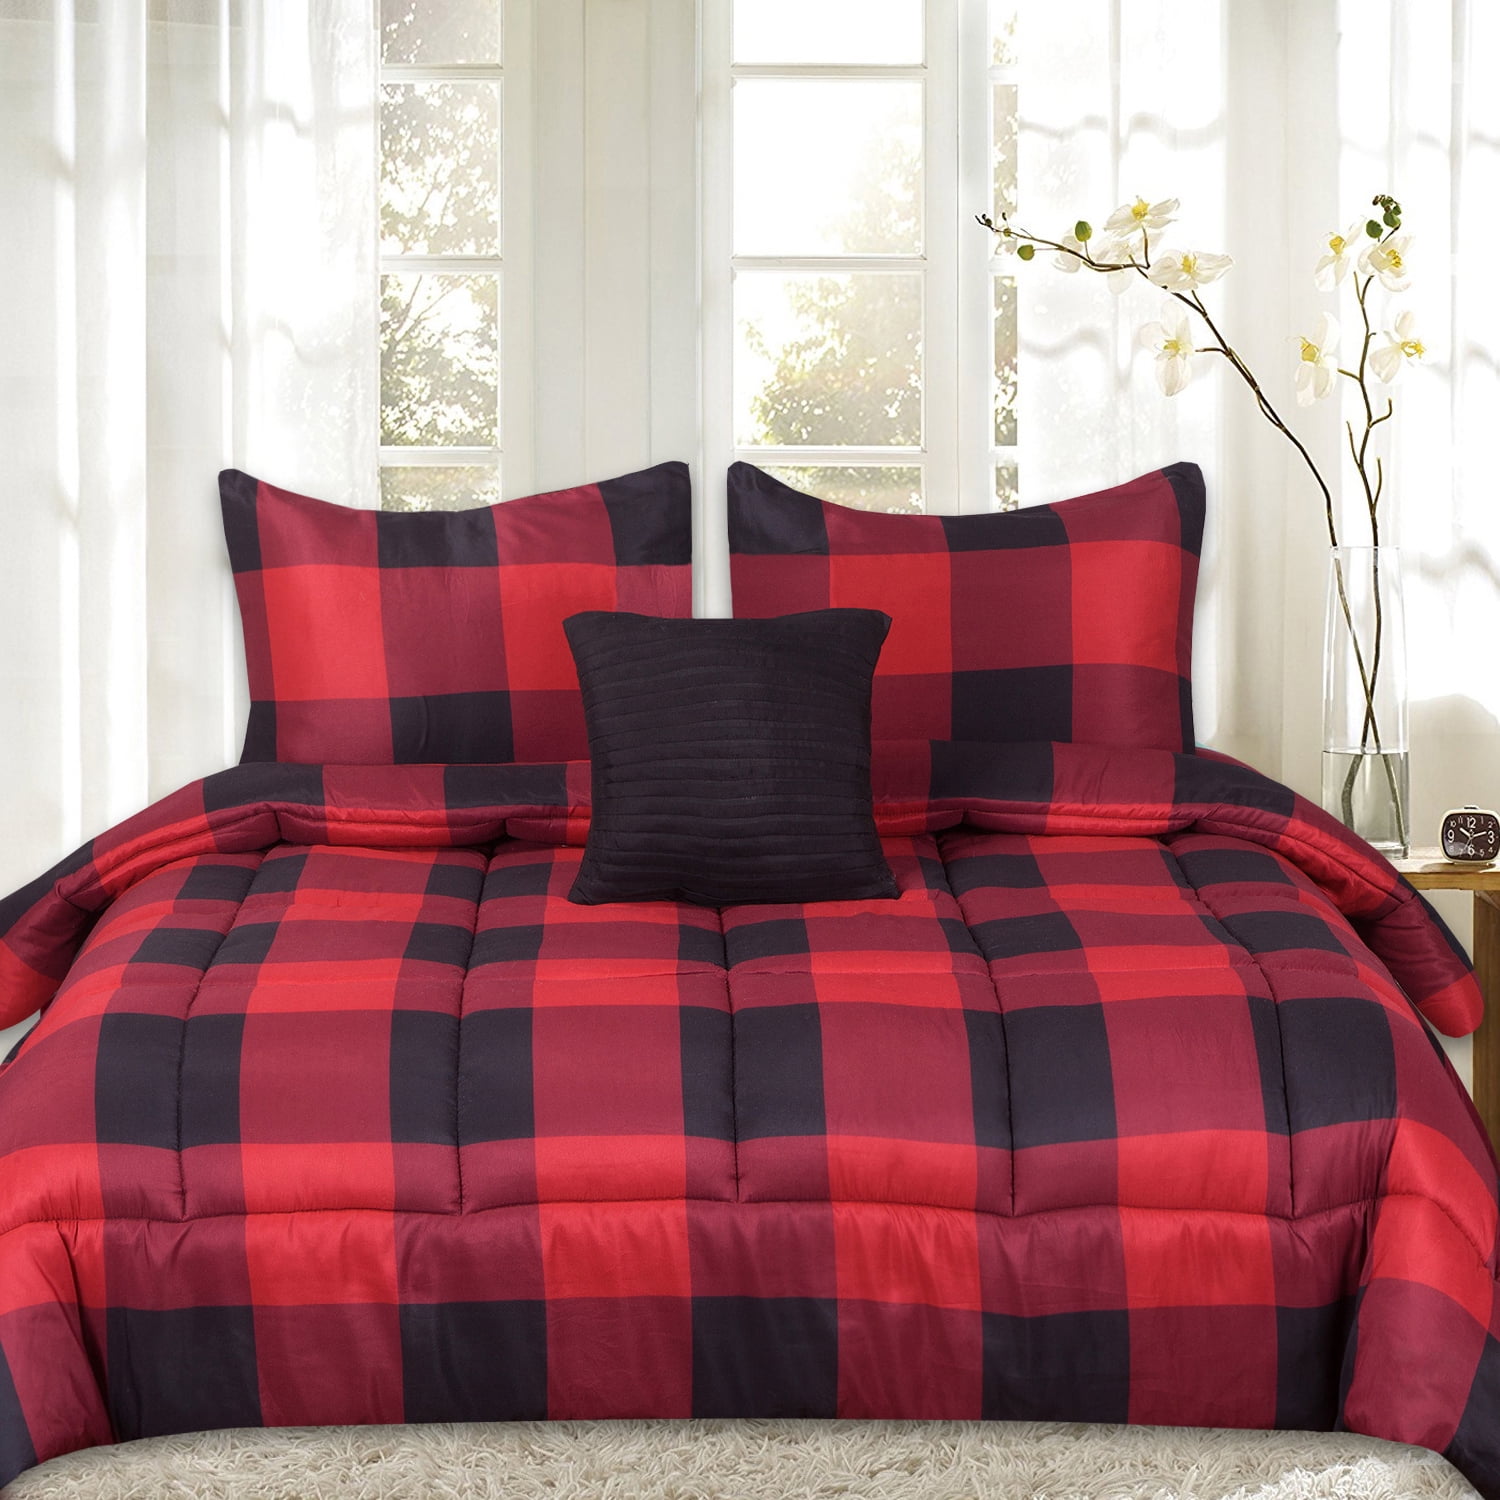 BRAND NEW IZOD Buffalo Check Reversible Full/Queen Comforter Set in Red/Blue 